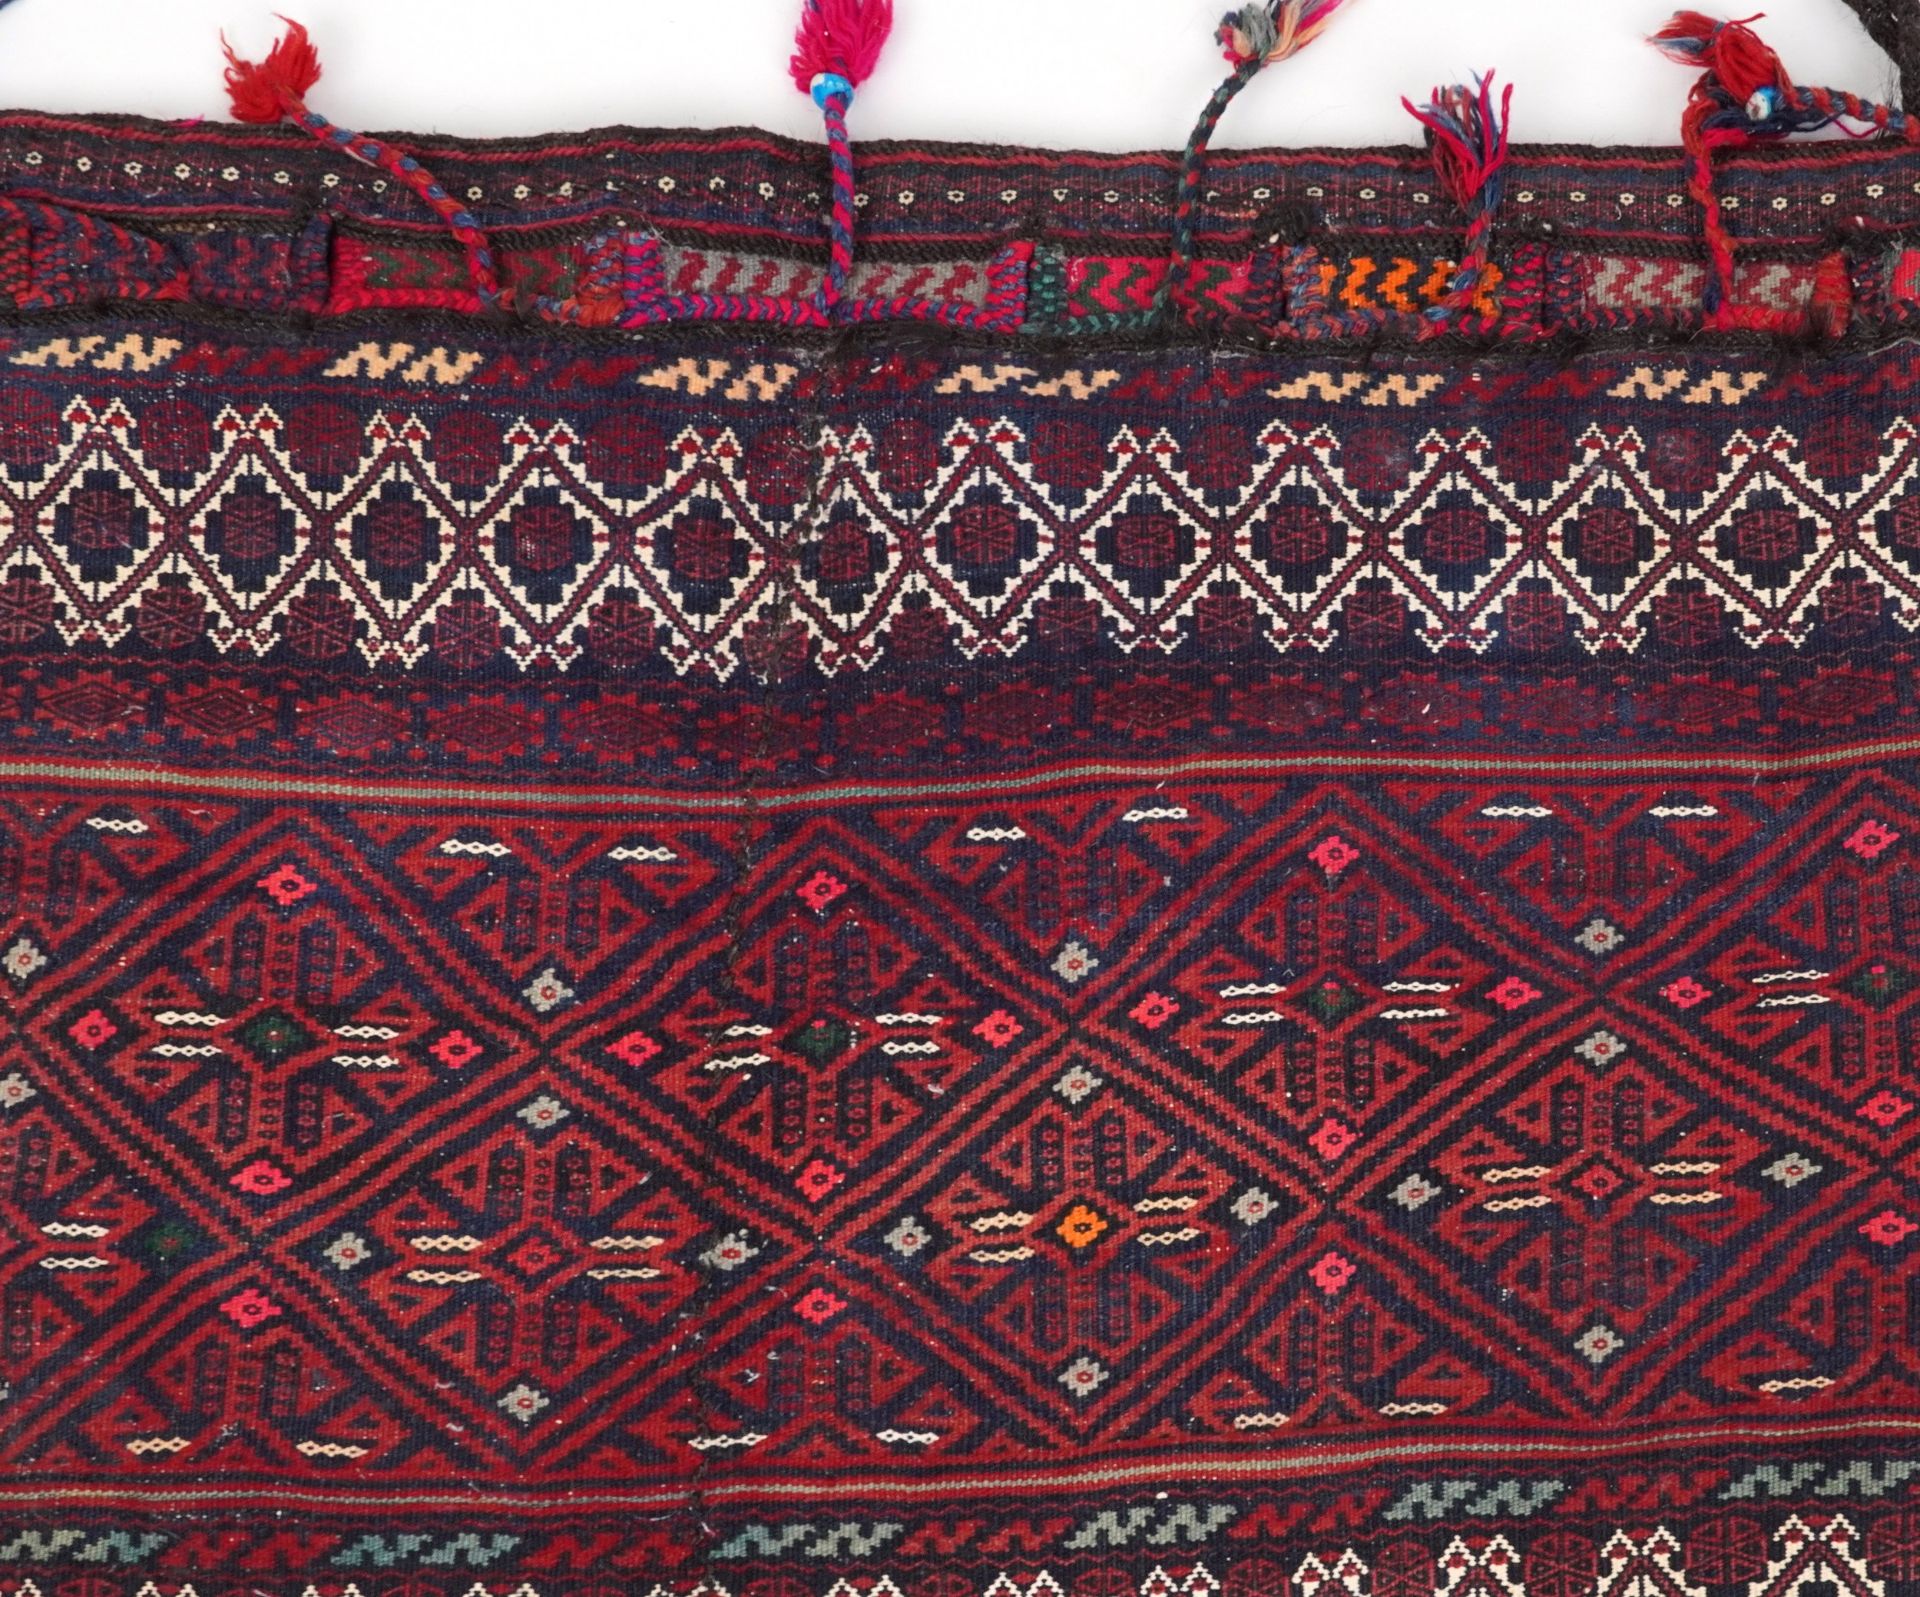 Rectangular Afghan red ground saddle bag having an allover repeat design, 150cm x 80cm : For further - Image 3 of 7